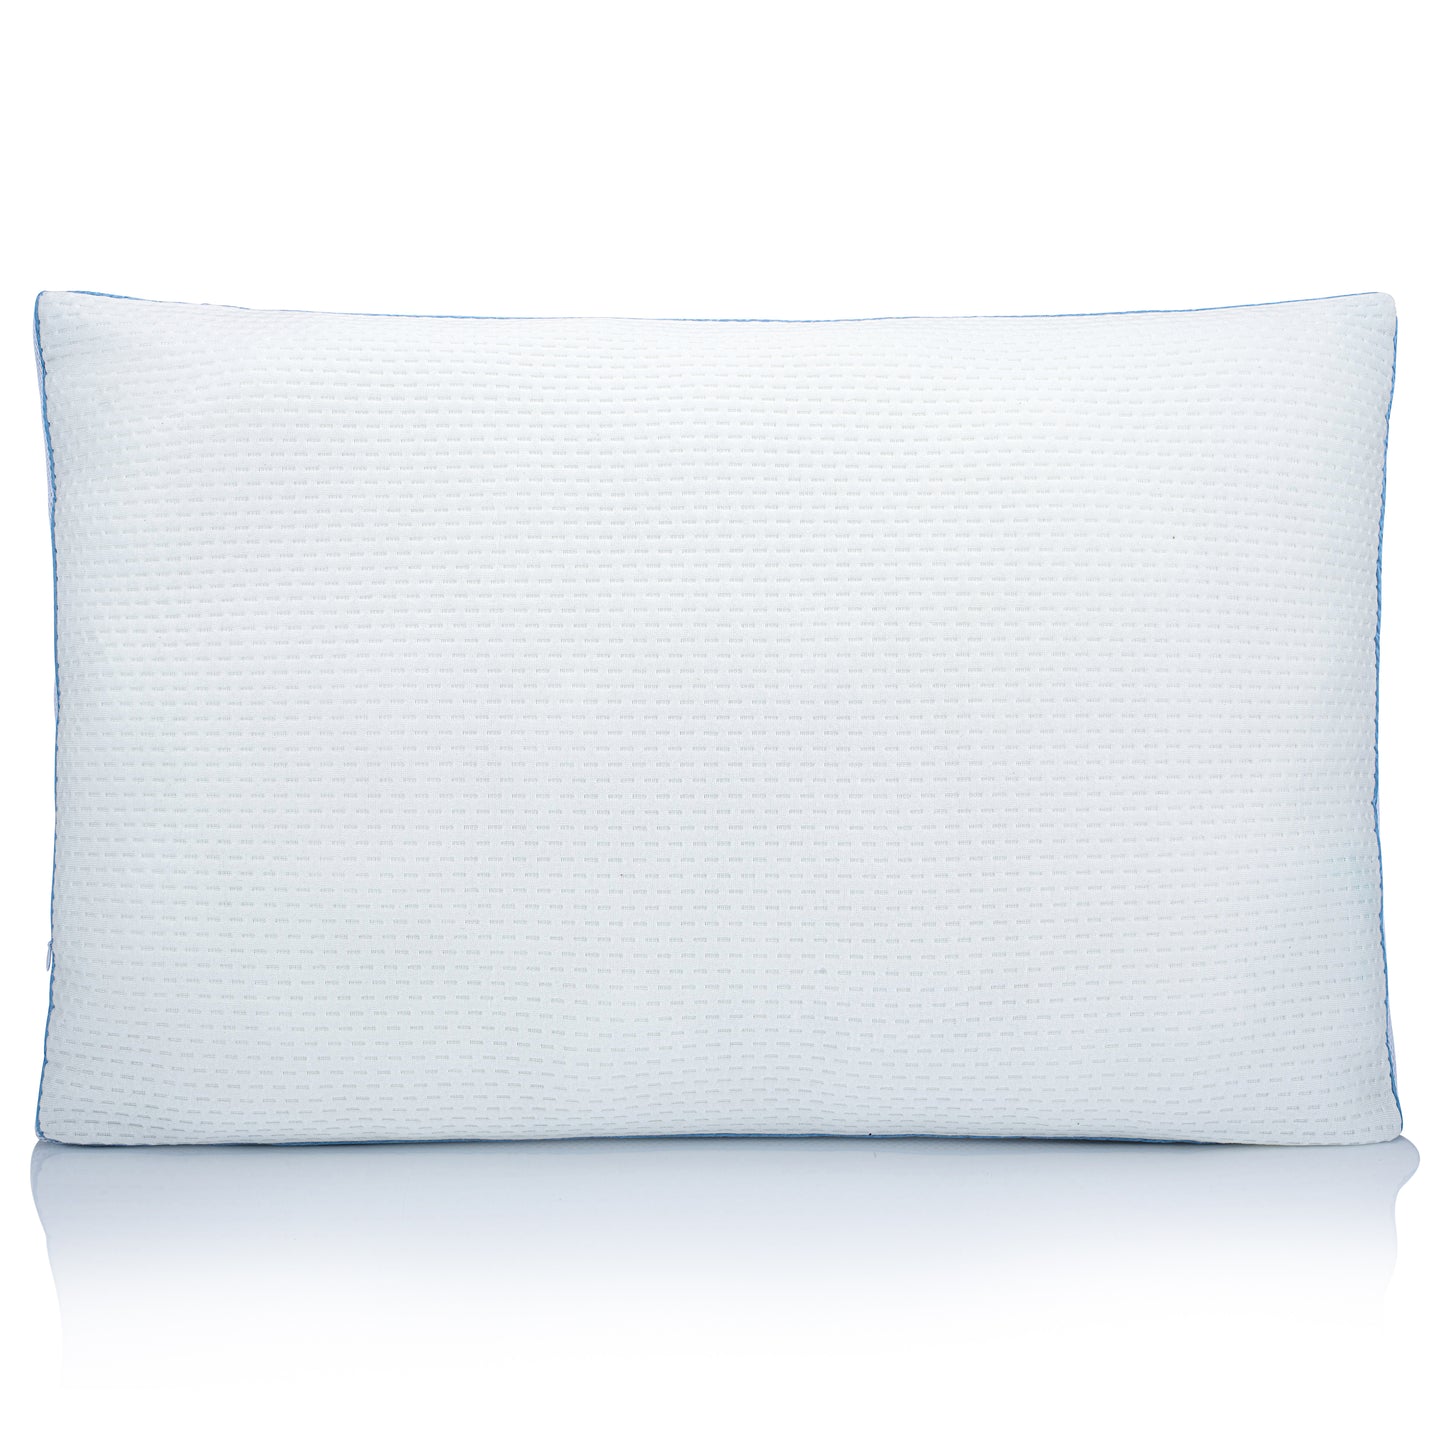 Coolbreeze Airflow Pillow - 1 Pack